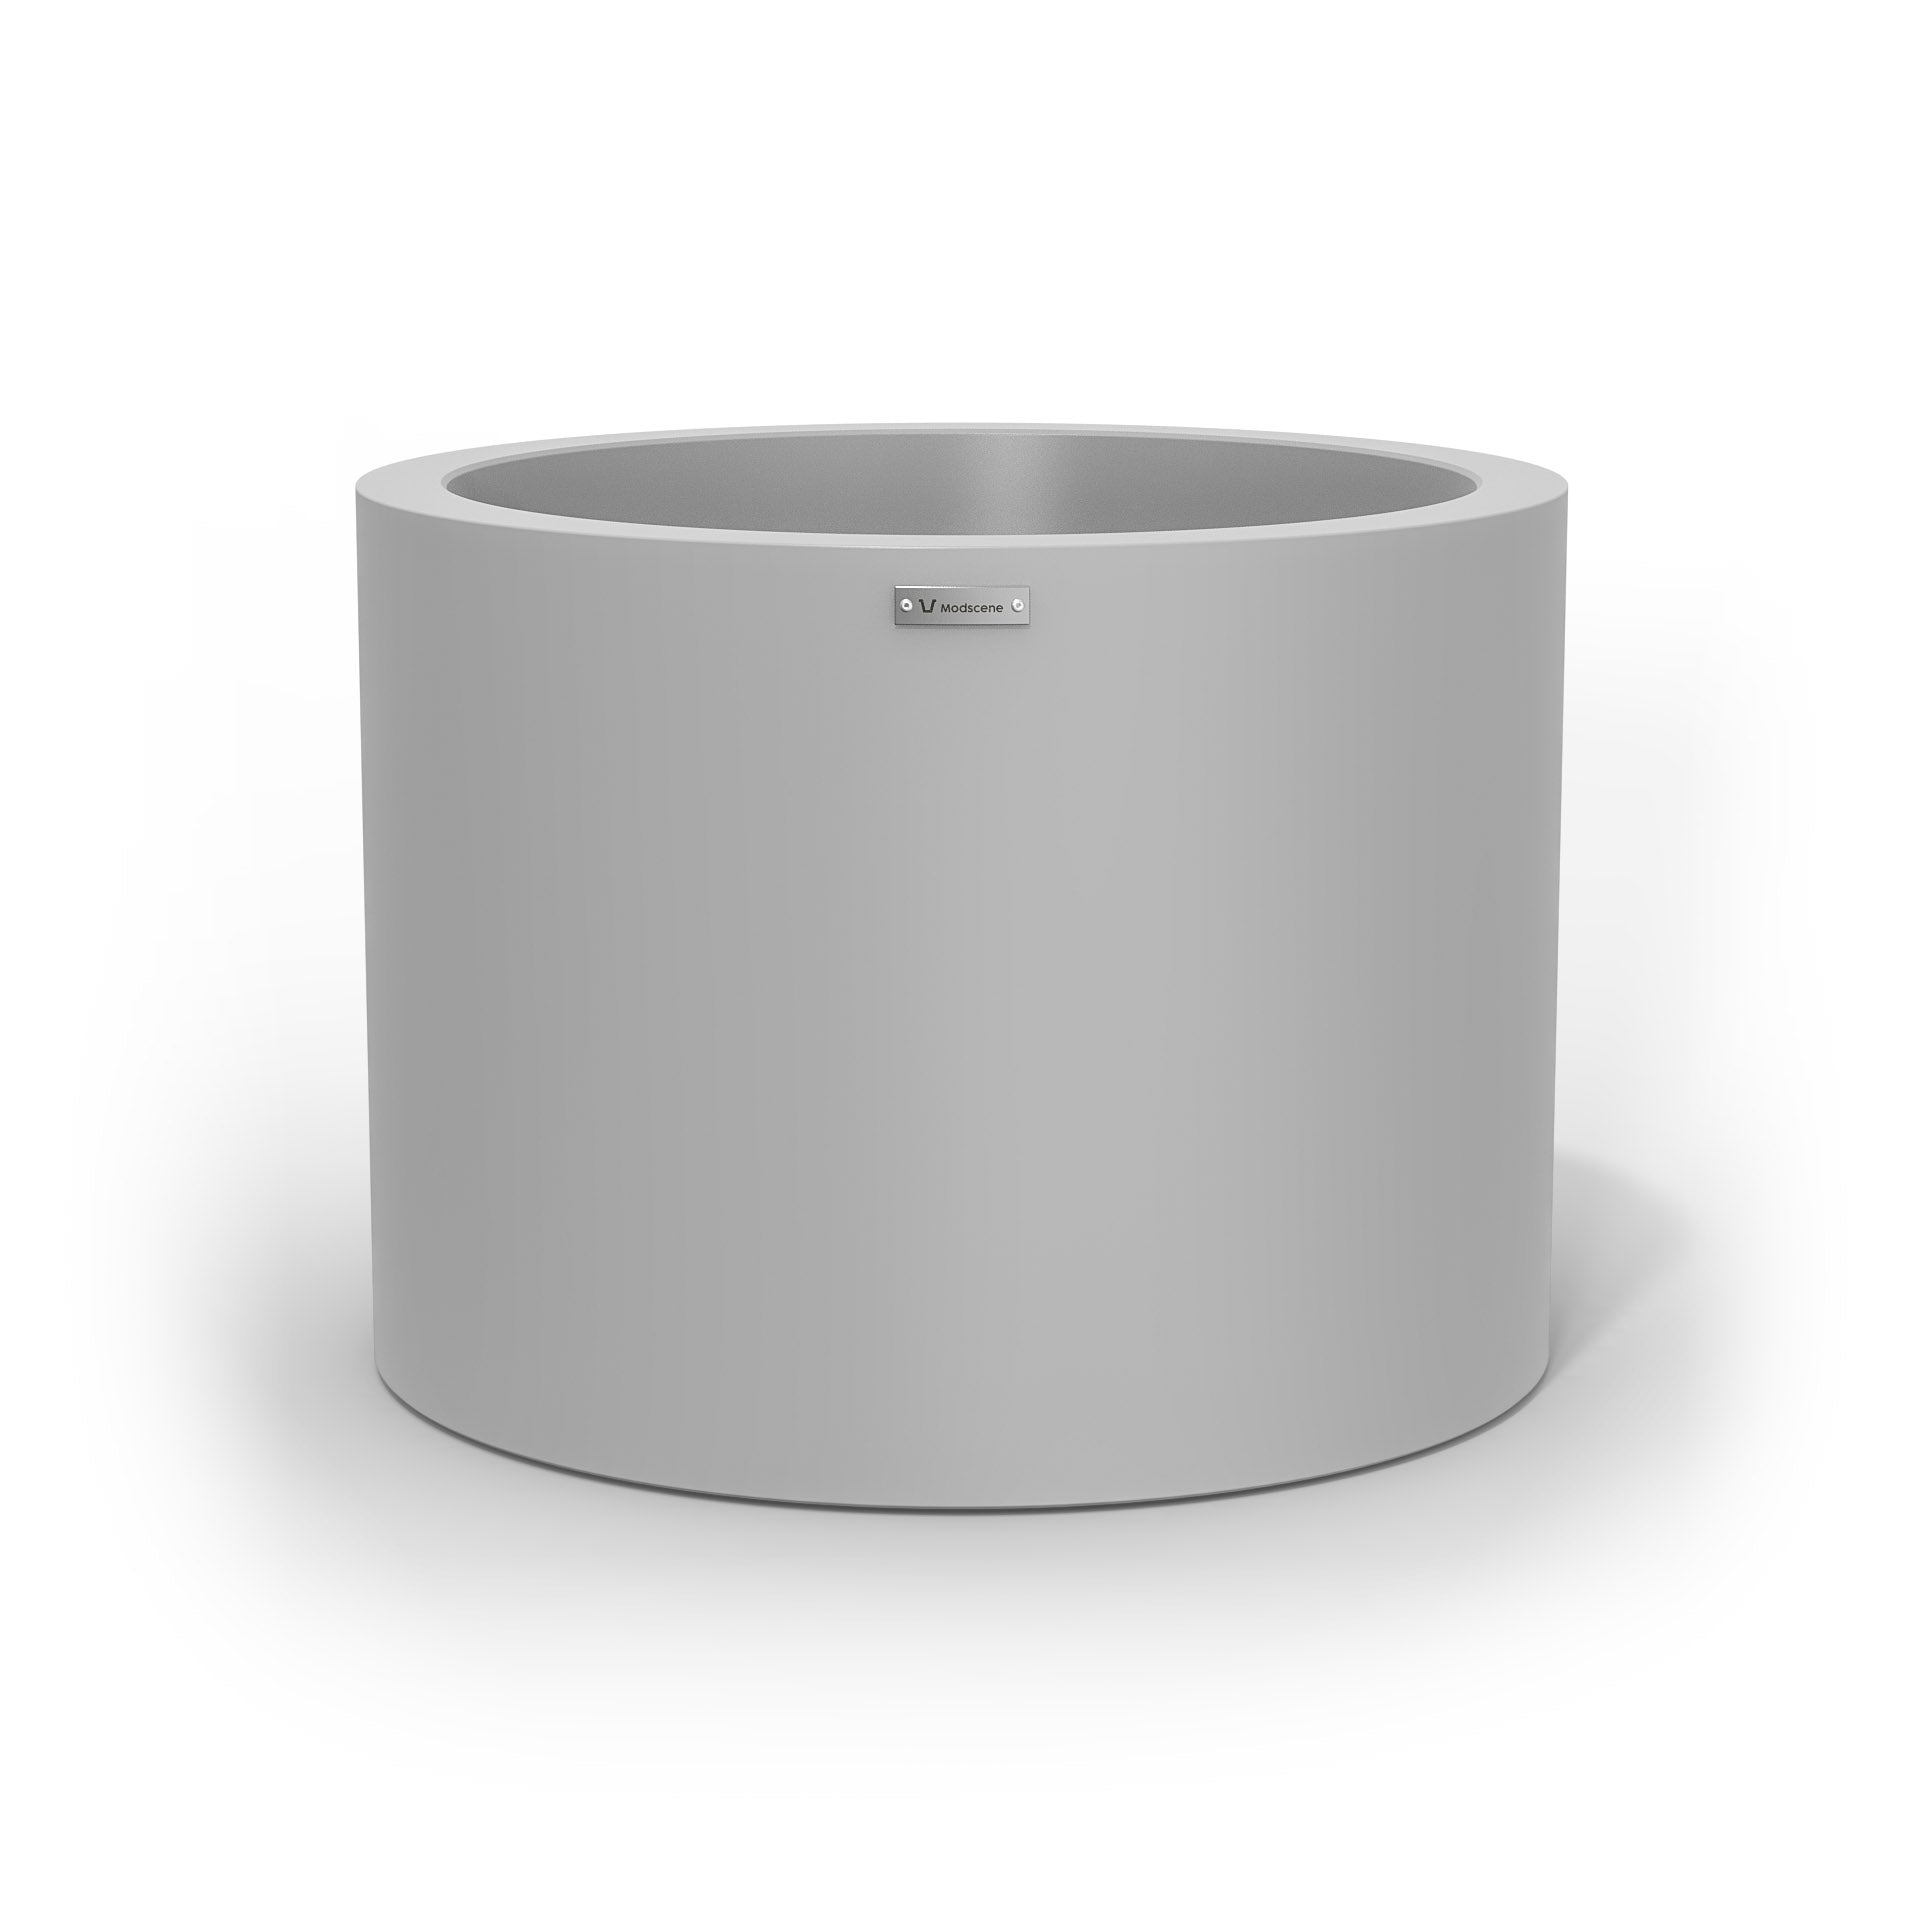 A cylinder shaped pot planter in a light grey colour.